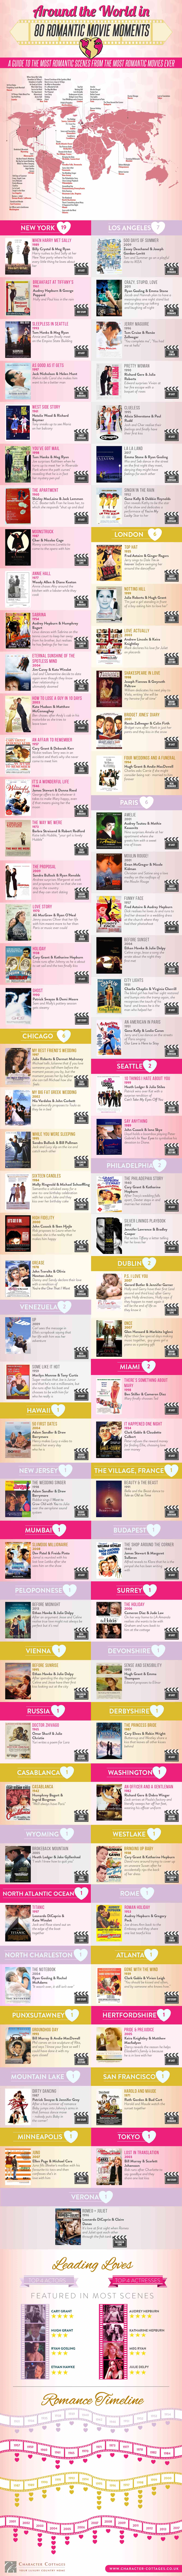 Top 80 Romantic Movie Moments And Where They Happened [Infographic]